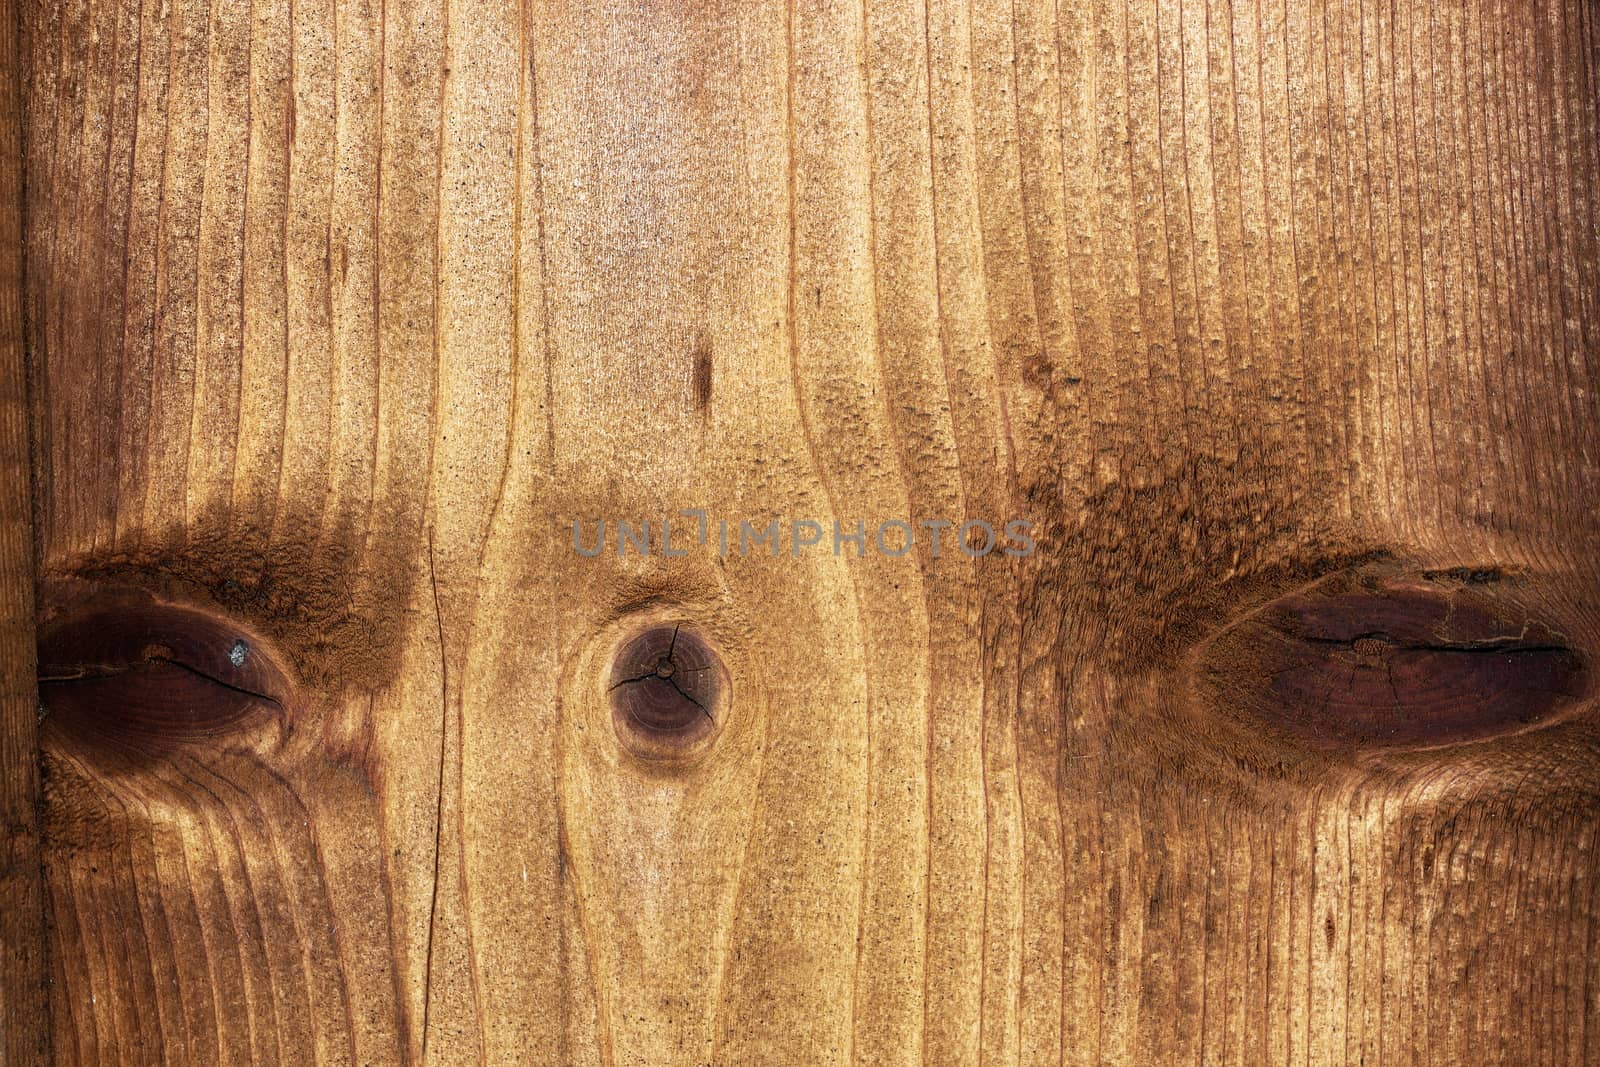 fir wood texture with knots by taviphoto